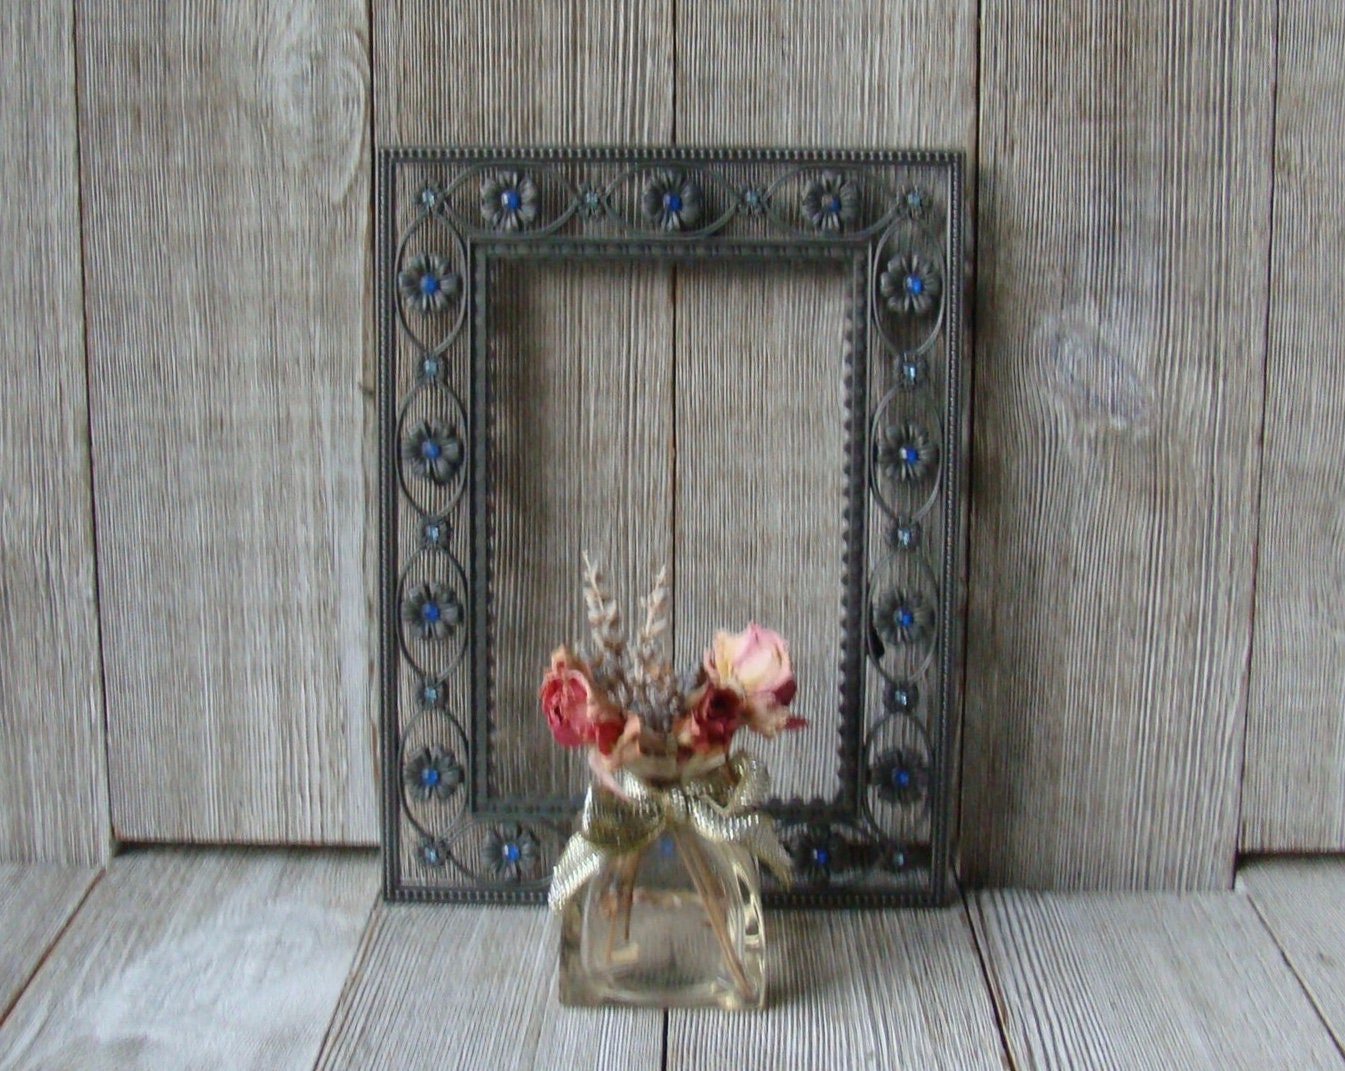 Picture Frames- Wood Cut Out Framed (4X6) – The Silver Strawberry